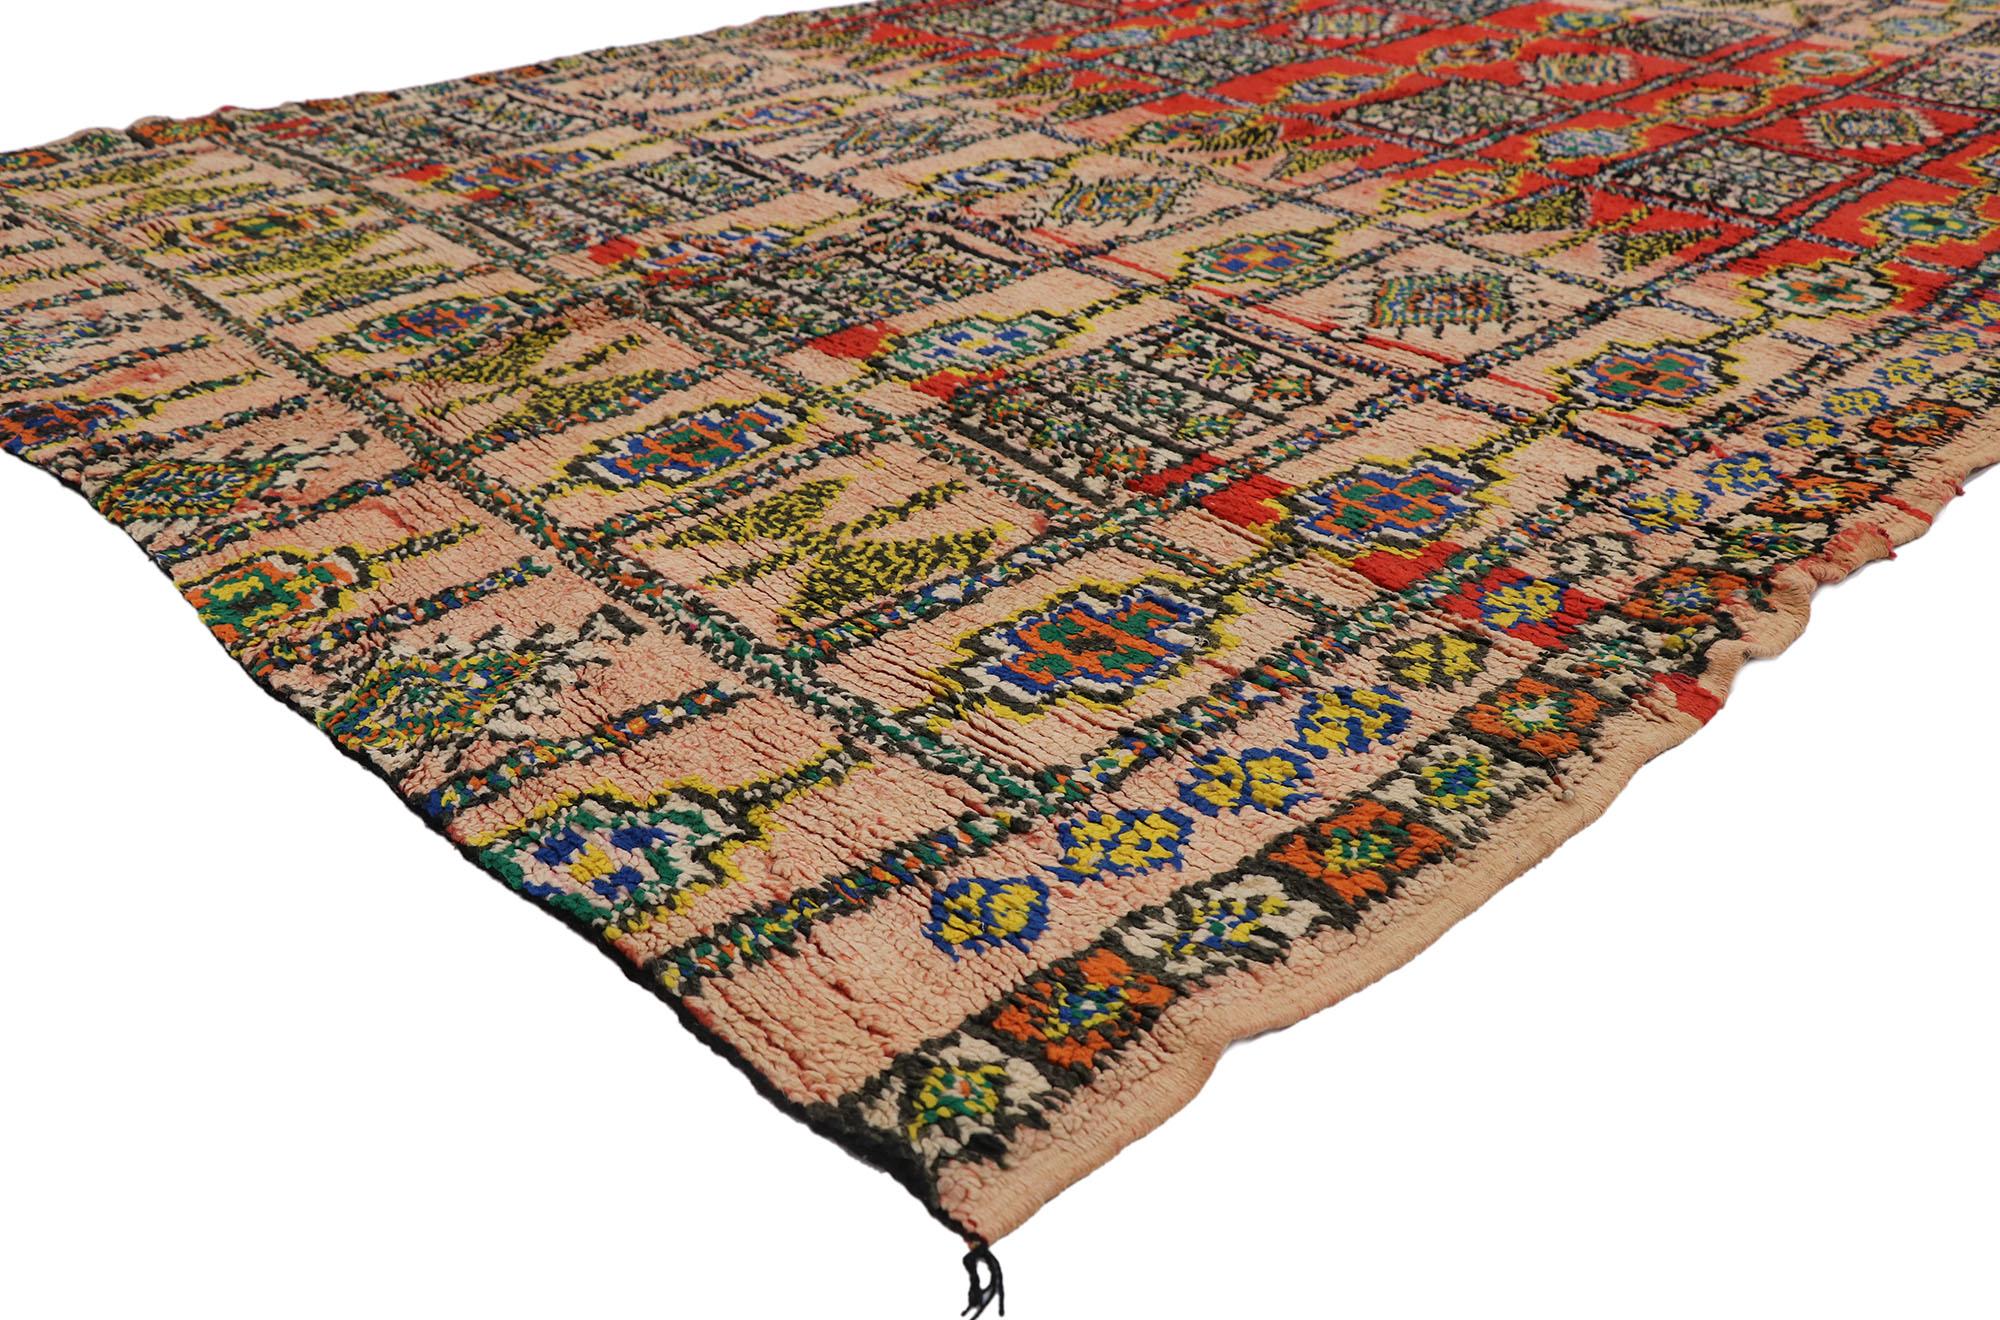 21462 Vintage Berber Boujad Moroccan Rug, 06'00 x 09'09.
Boho ​Jungalow meets Wabi-Sabi in this hand knotted wool vintage Berber Moroccan rug. The esoteric symbolism and vibrant color palette woven into this piece work together creating a happy